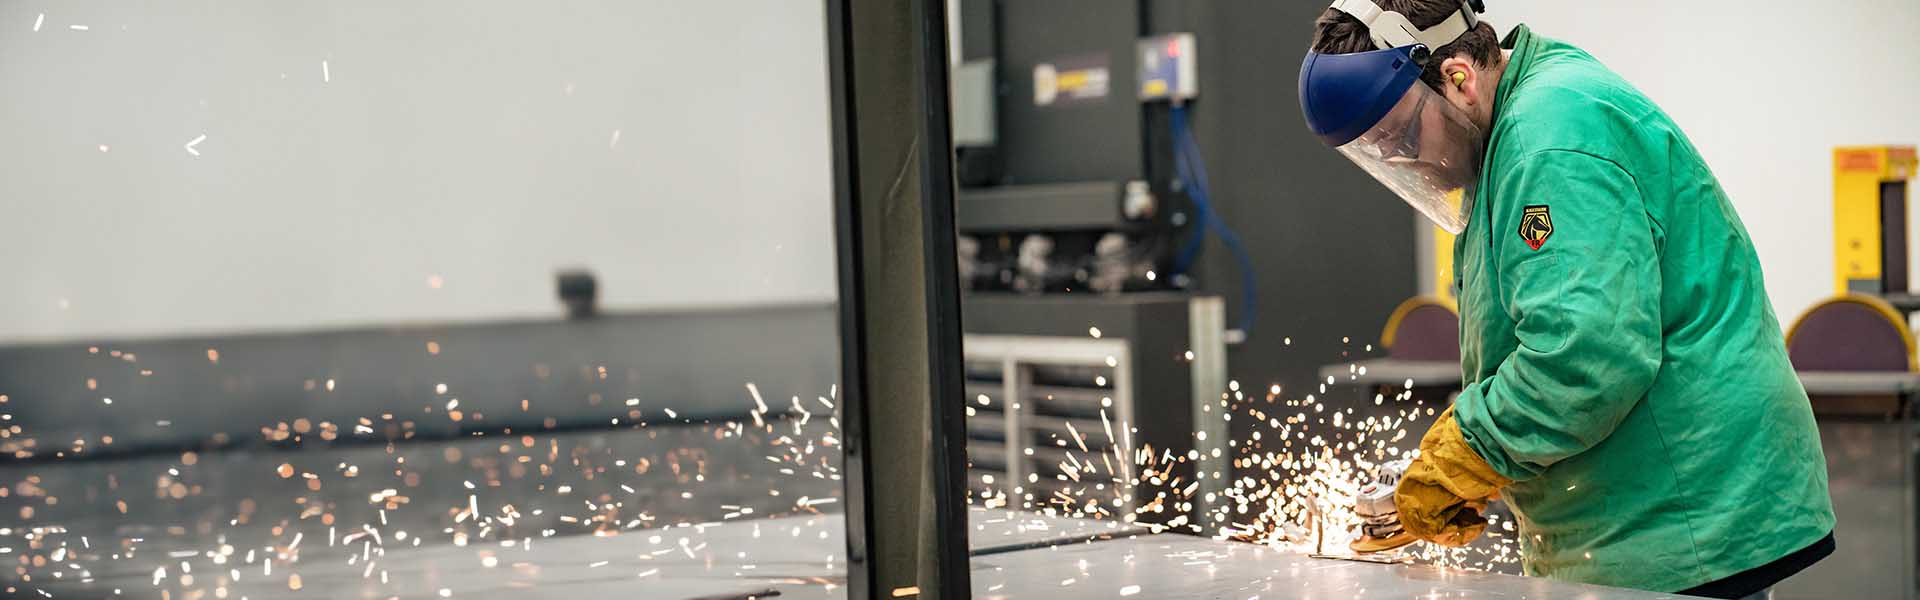 Student welding with sparks flying